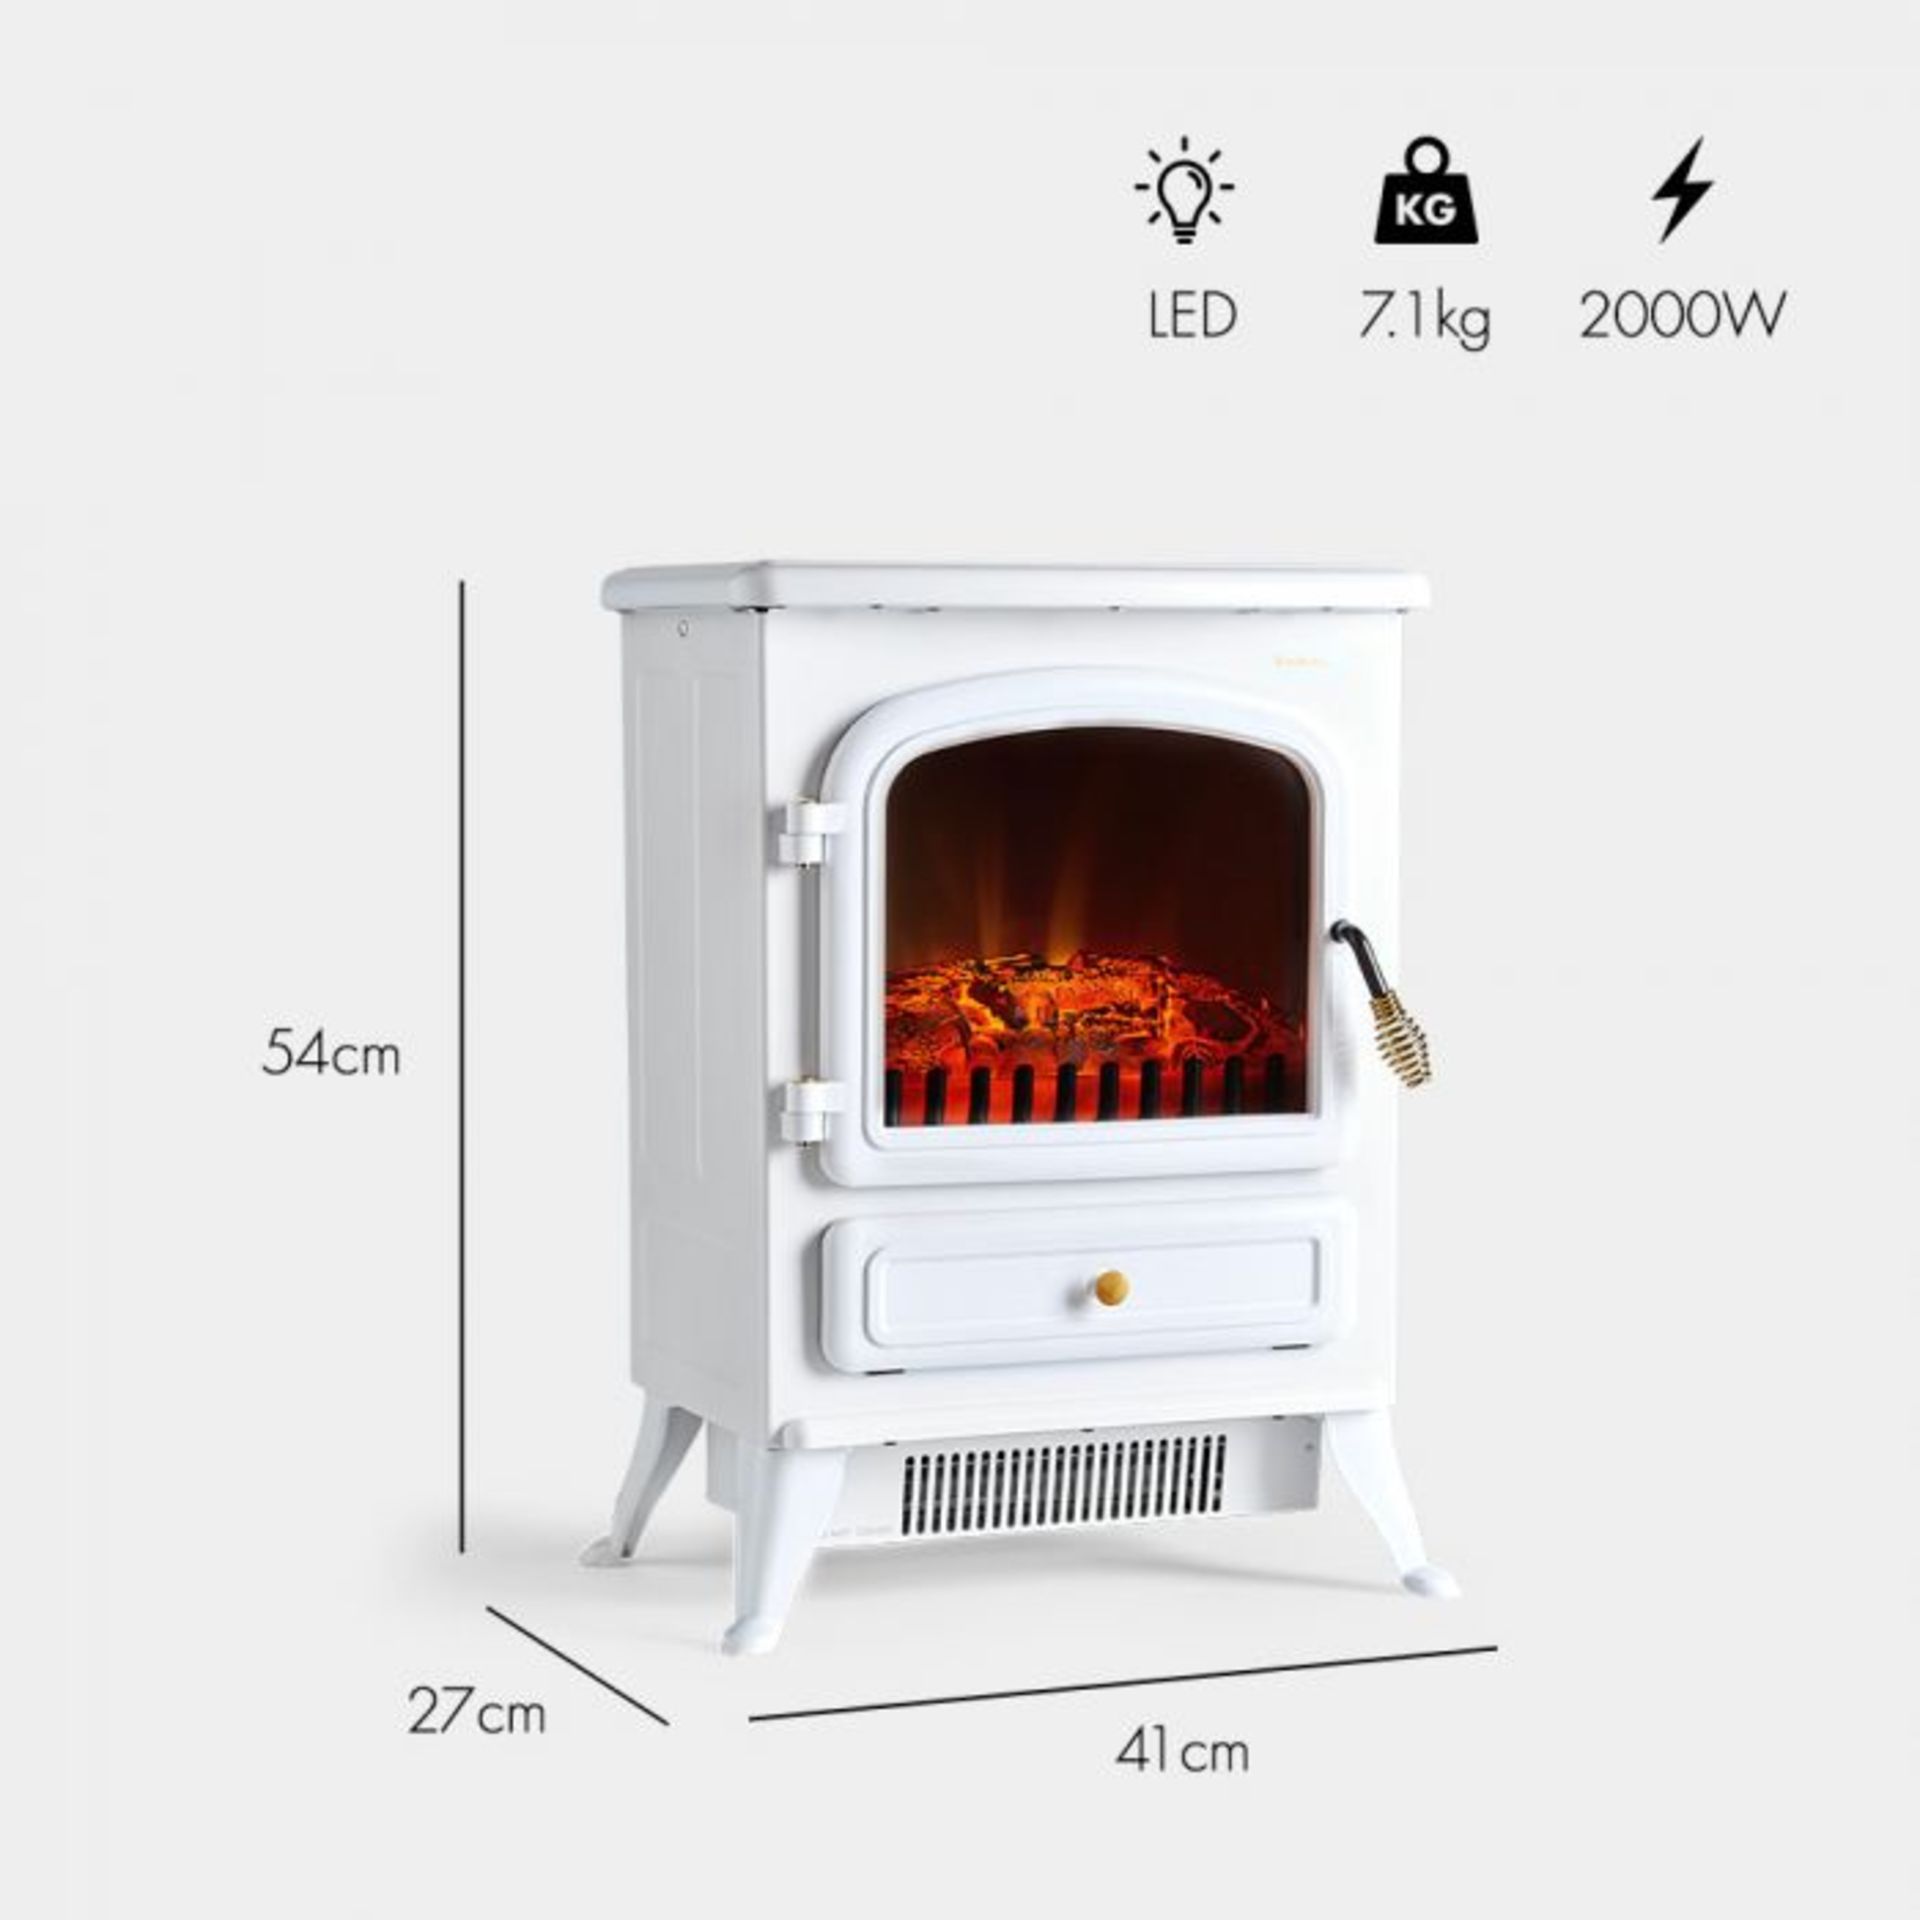 (V132) 1850W Portable Electric Stove Heater Beautifully designed freestanding small stove heat... - Image 4 of 4